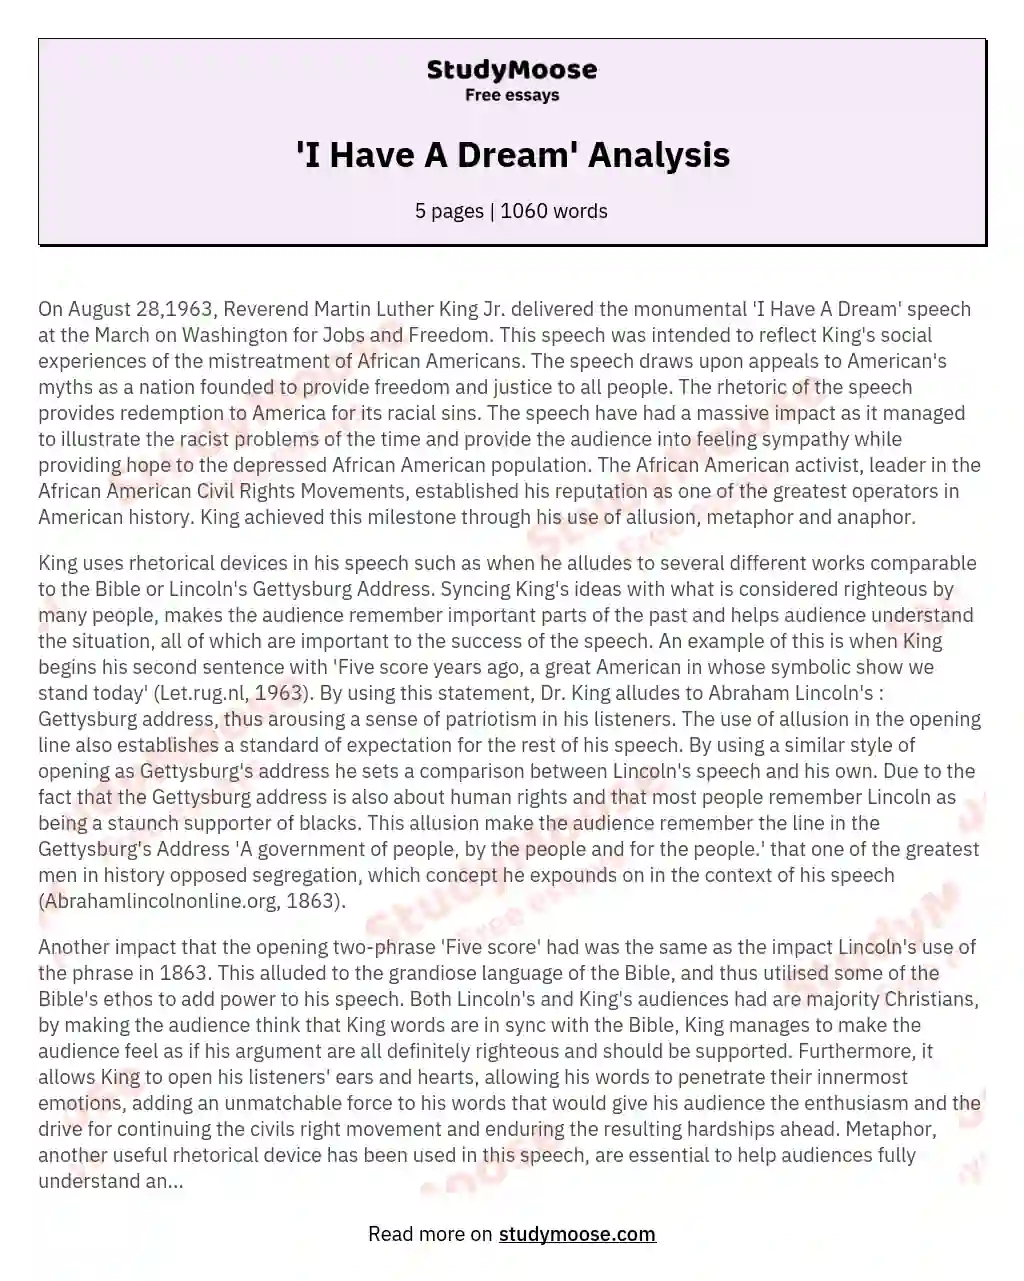 Реферат: I Have A Dream Analysis Essay Research